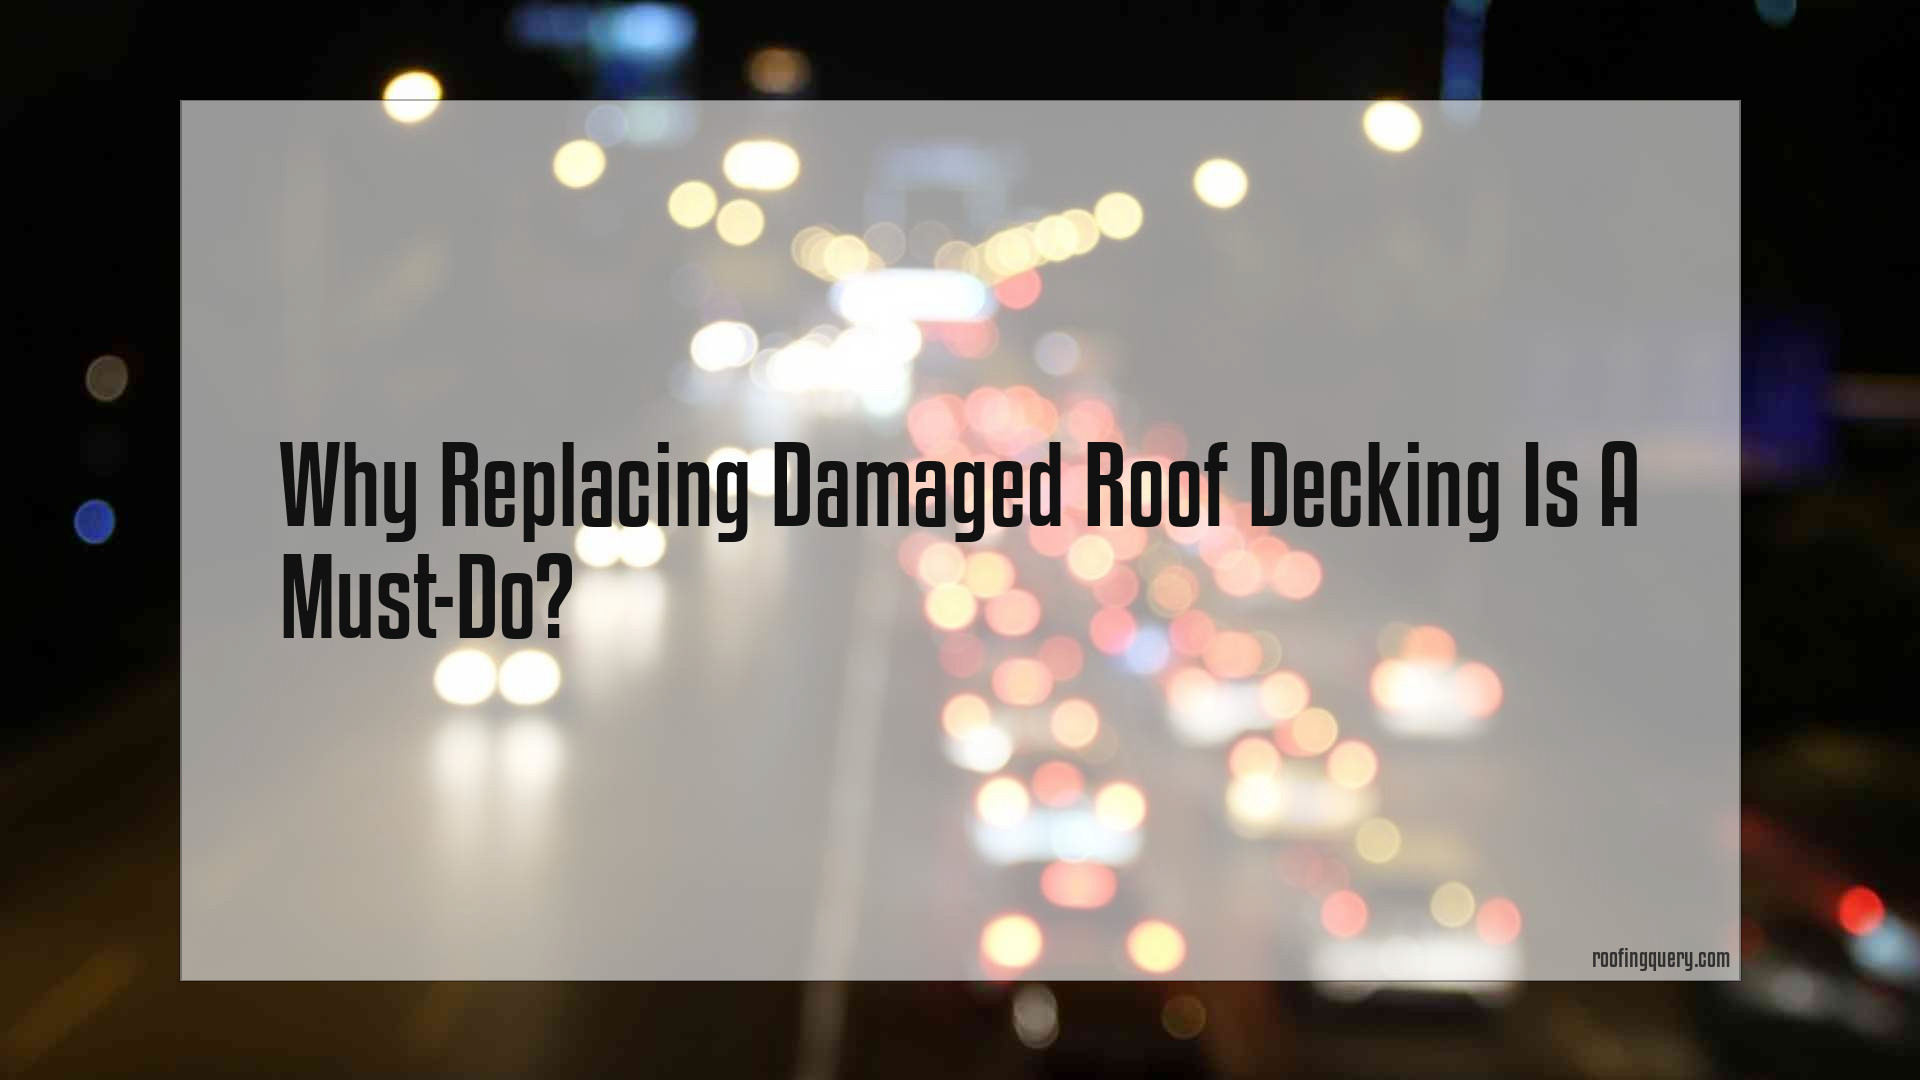 Why Replacing Damaged Roof Decking Is A Must-Do